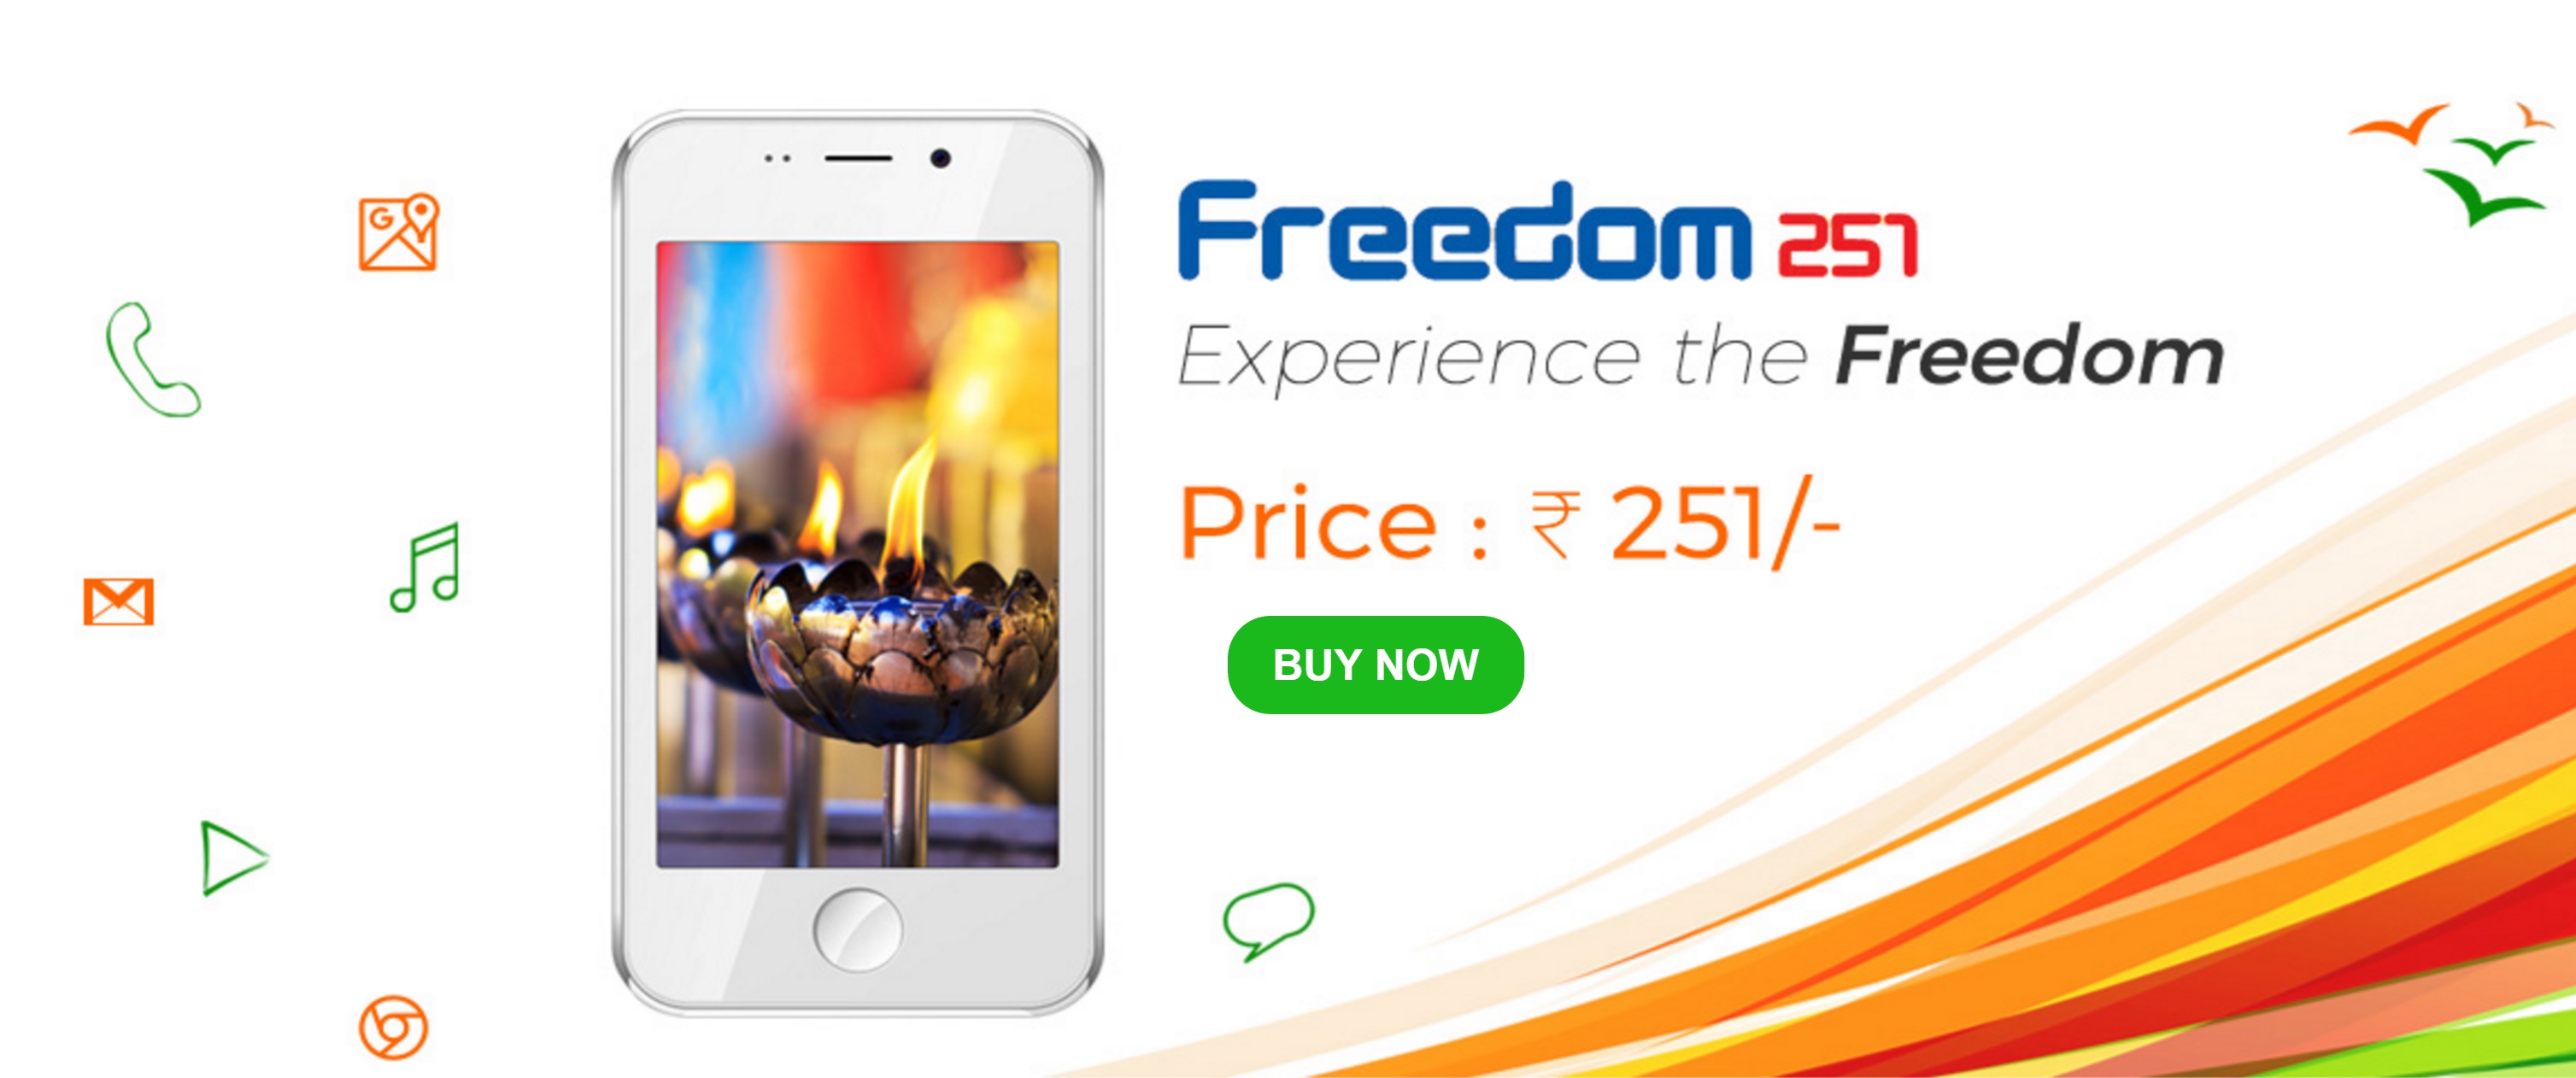 Ringing Bells stops taking orders for 24 hrs for Freedom251 | Business  Insider India